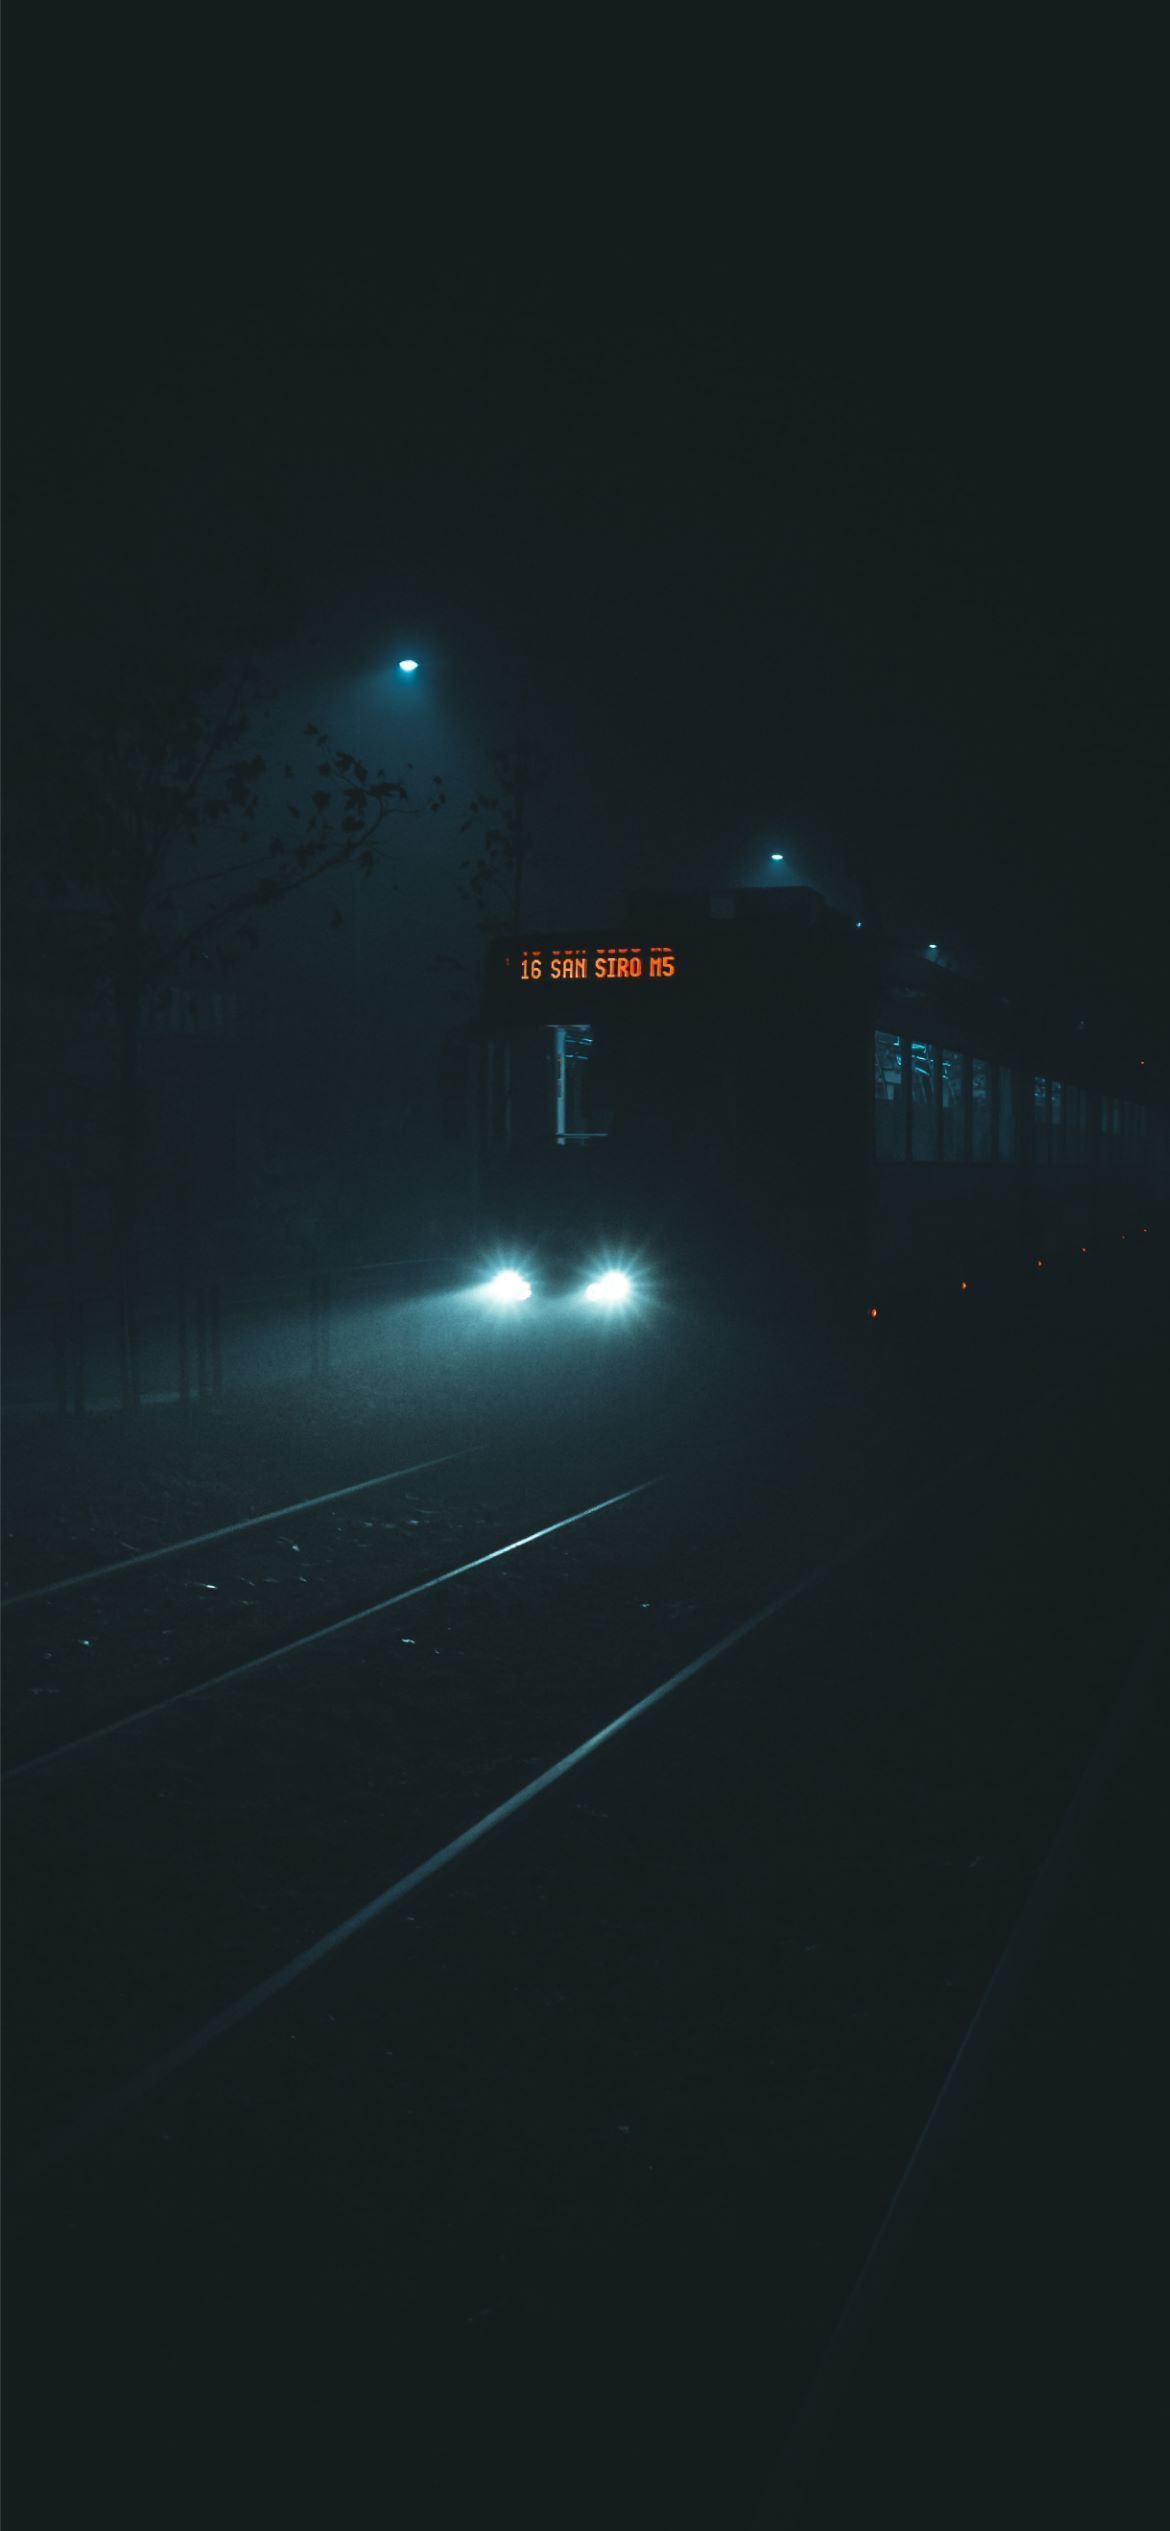 A bus and car with headlights on in the dark - Road, depressing, sad